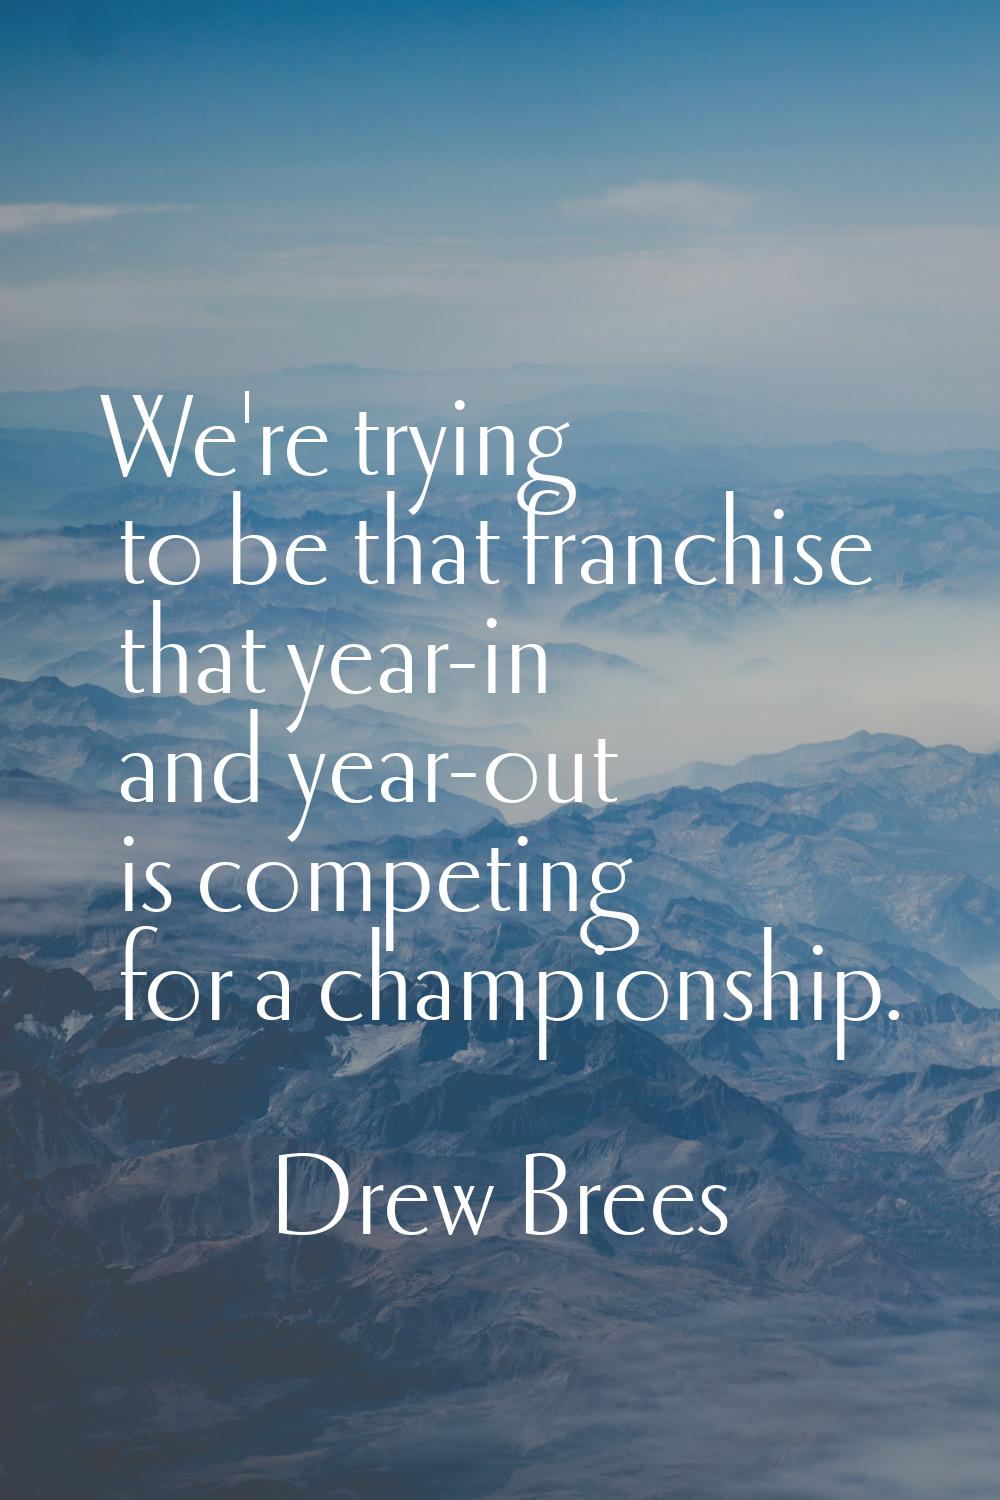 We're trying to be that franchise that year-in and year-out is competing for a championship.